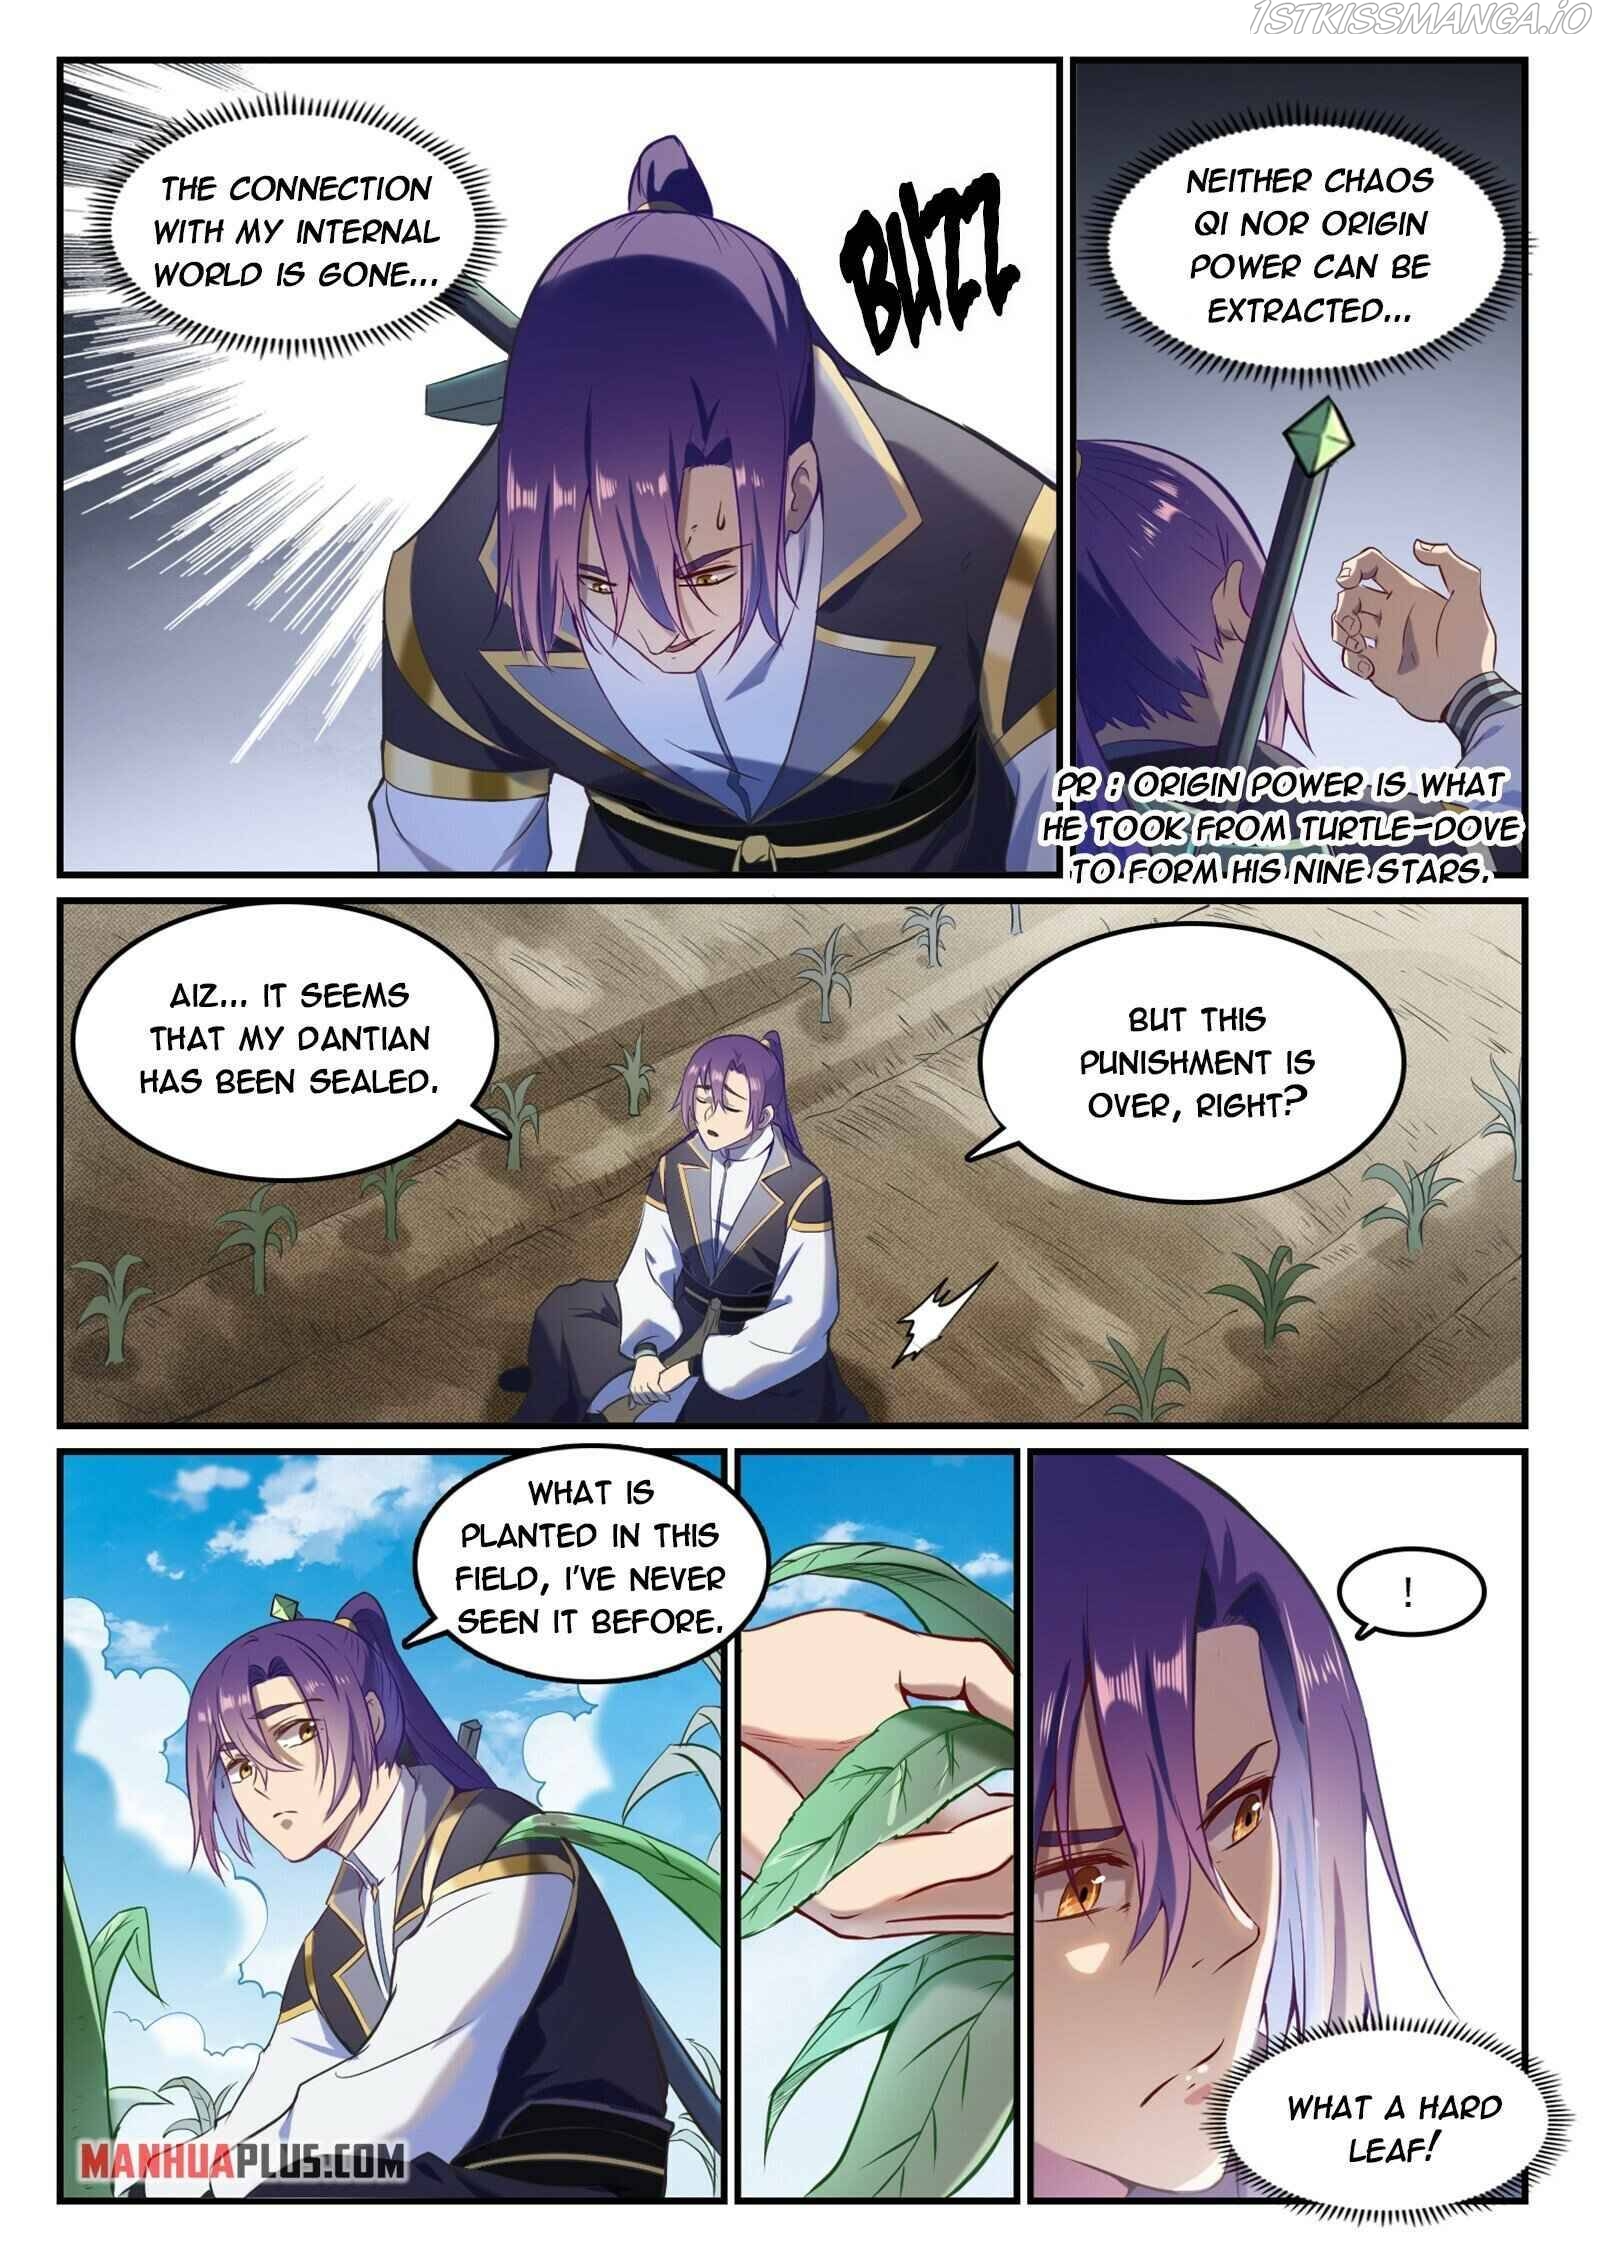 Apotheosis Chapter 842 - Page 7